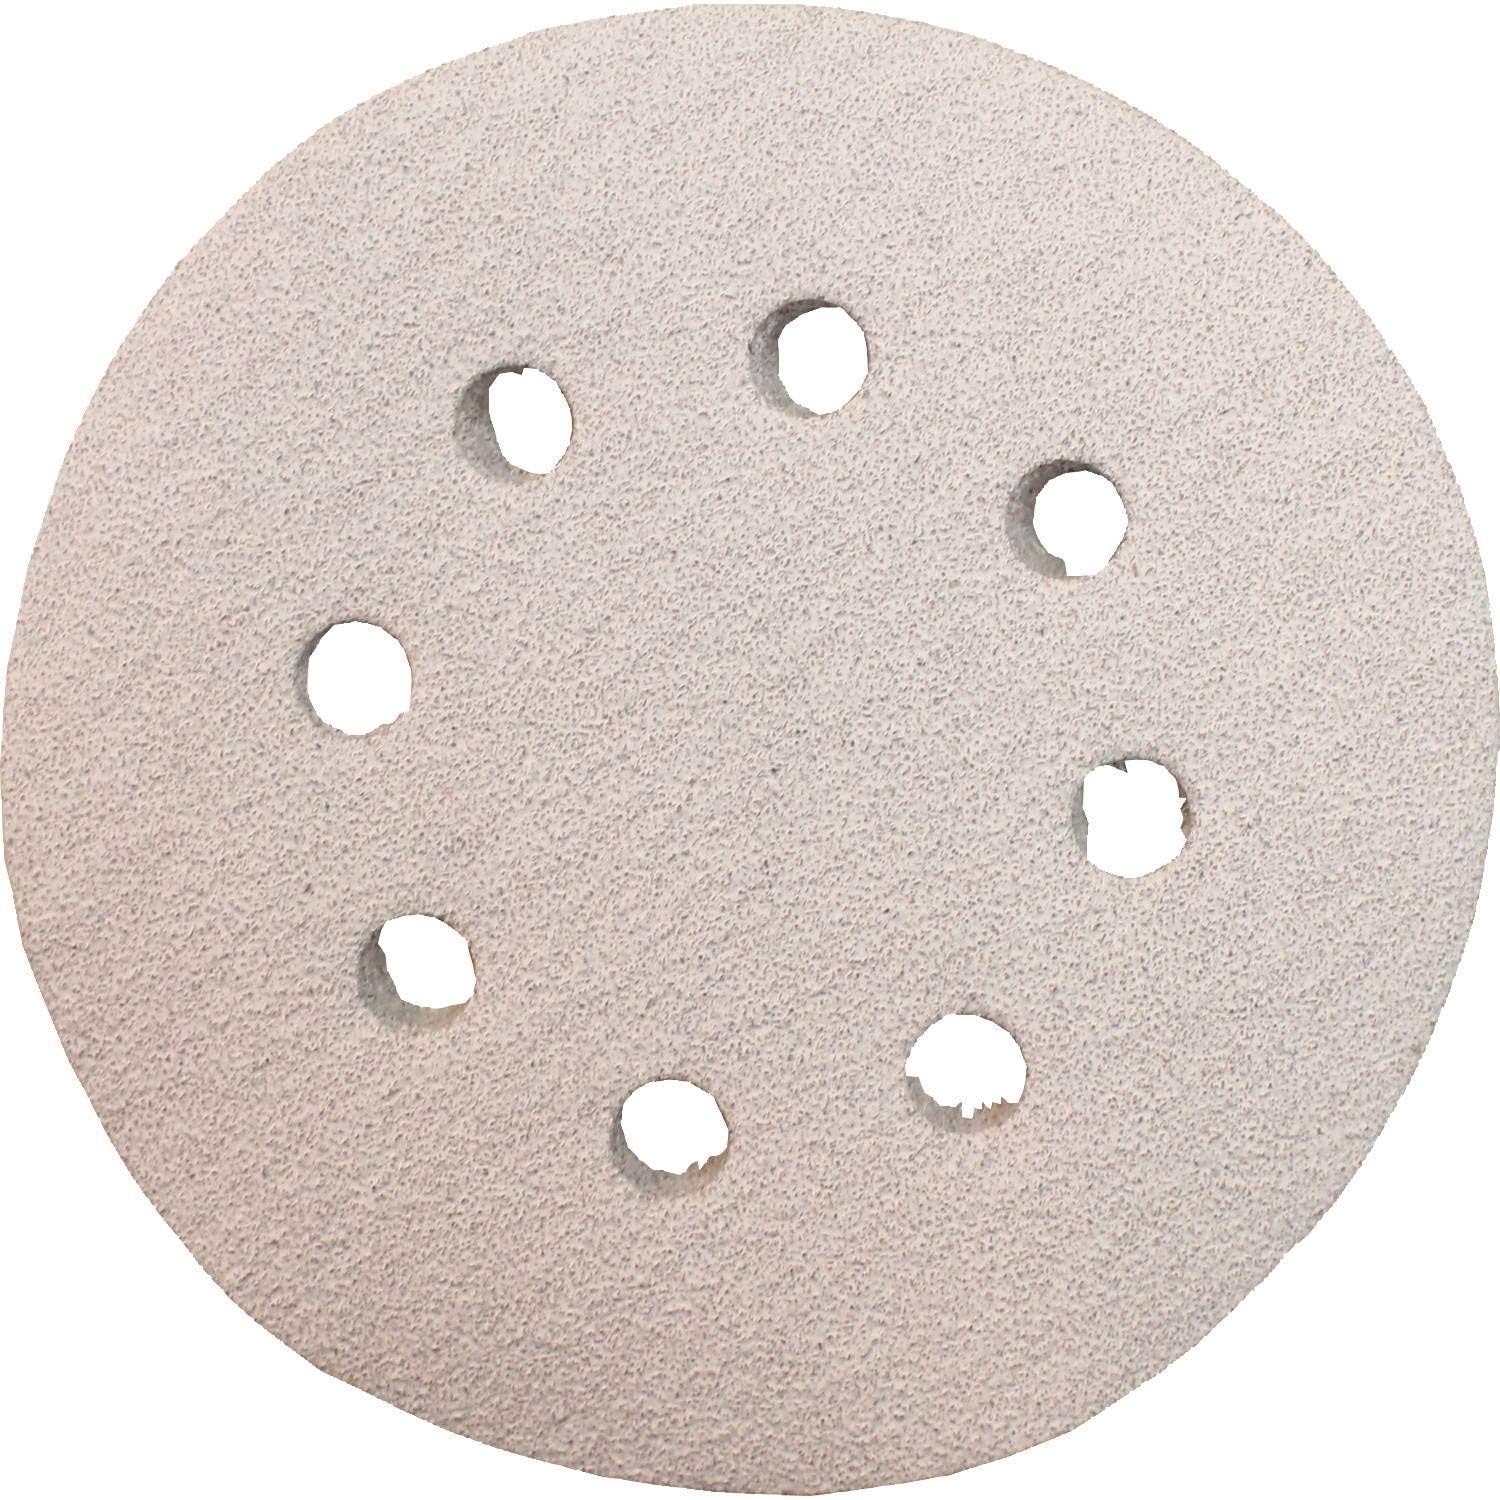 Makita 794523-A-50 5-Inch 100-Grit Abrasive Disc, 50 per Package 100 Grit 5"